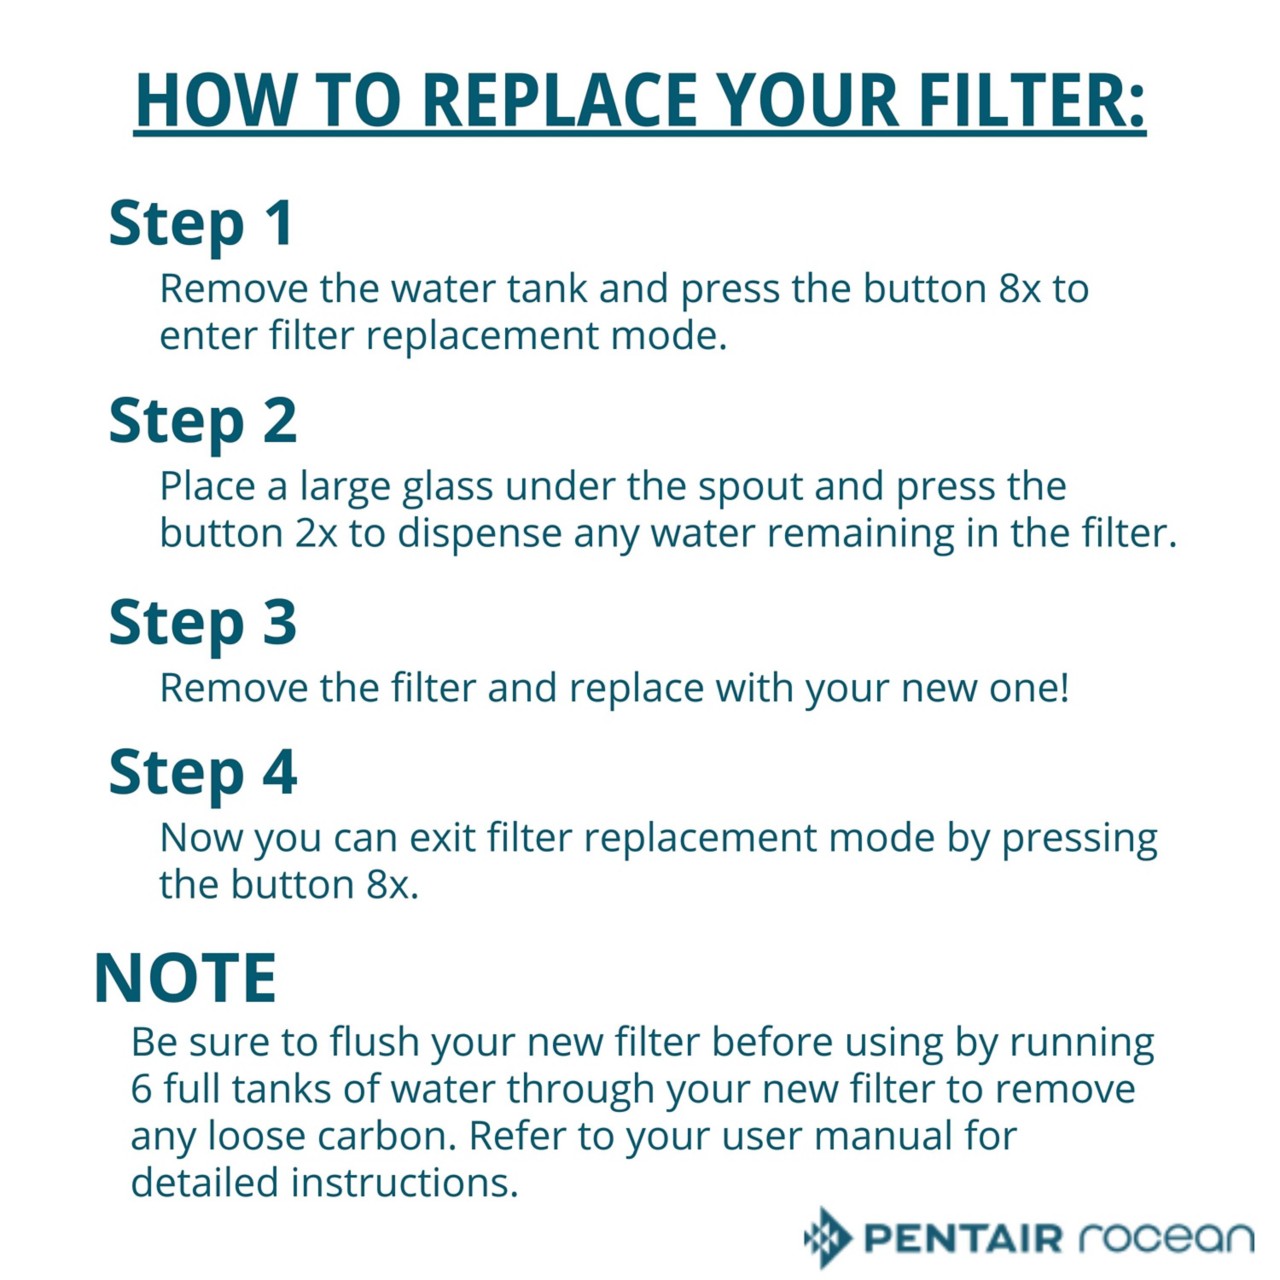 How to replace your filter instructions - Step 1 Remove the water tank and press the button 8 times to enter filter replacement mode. Step 2 place a large glass under the spout and press the button 2 times to dispense any water remaining in the filter. Step 3 Remove the filter and replace with your new one. Step 4 now you can exit filter replacement mode by pressing the button 8 times. Note: Be sure to flush your new filter before using by running 6 full tanks of water through your new filter to remove any loose carbon. Refer to your user manual for detailed instructions.